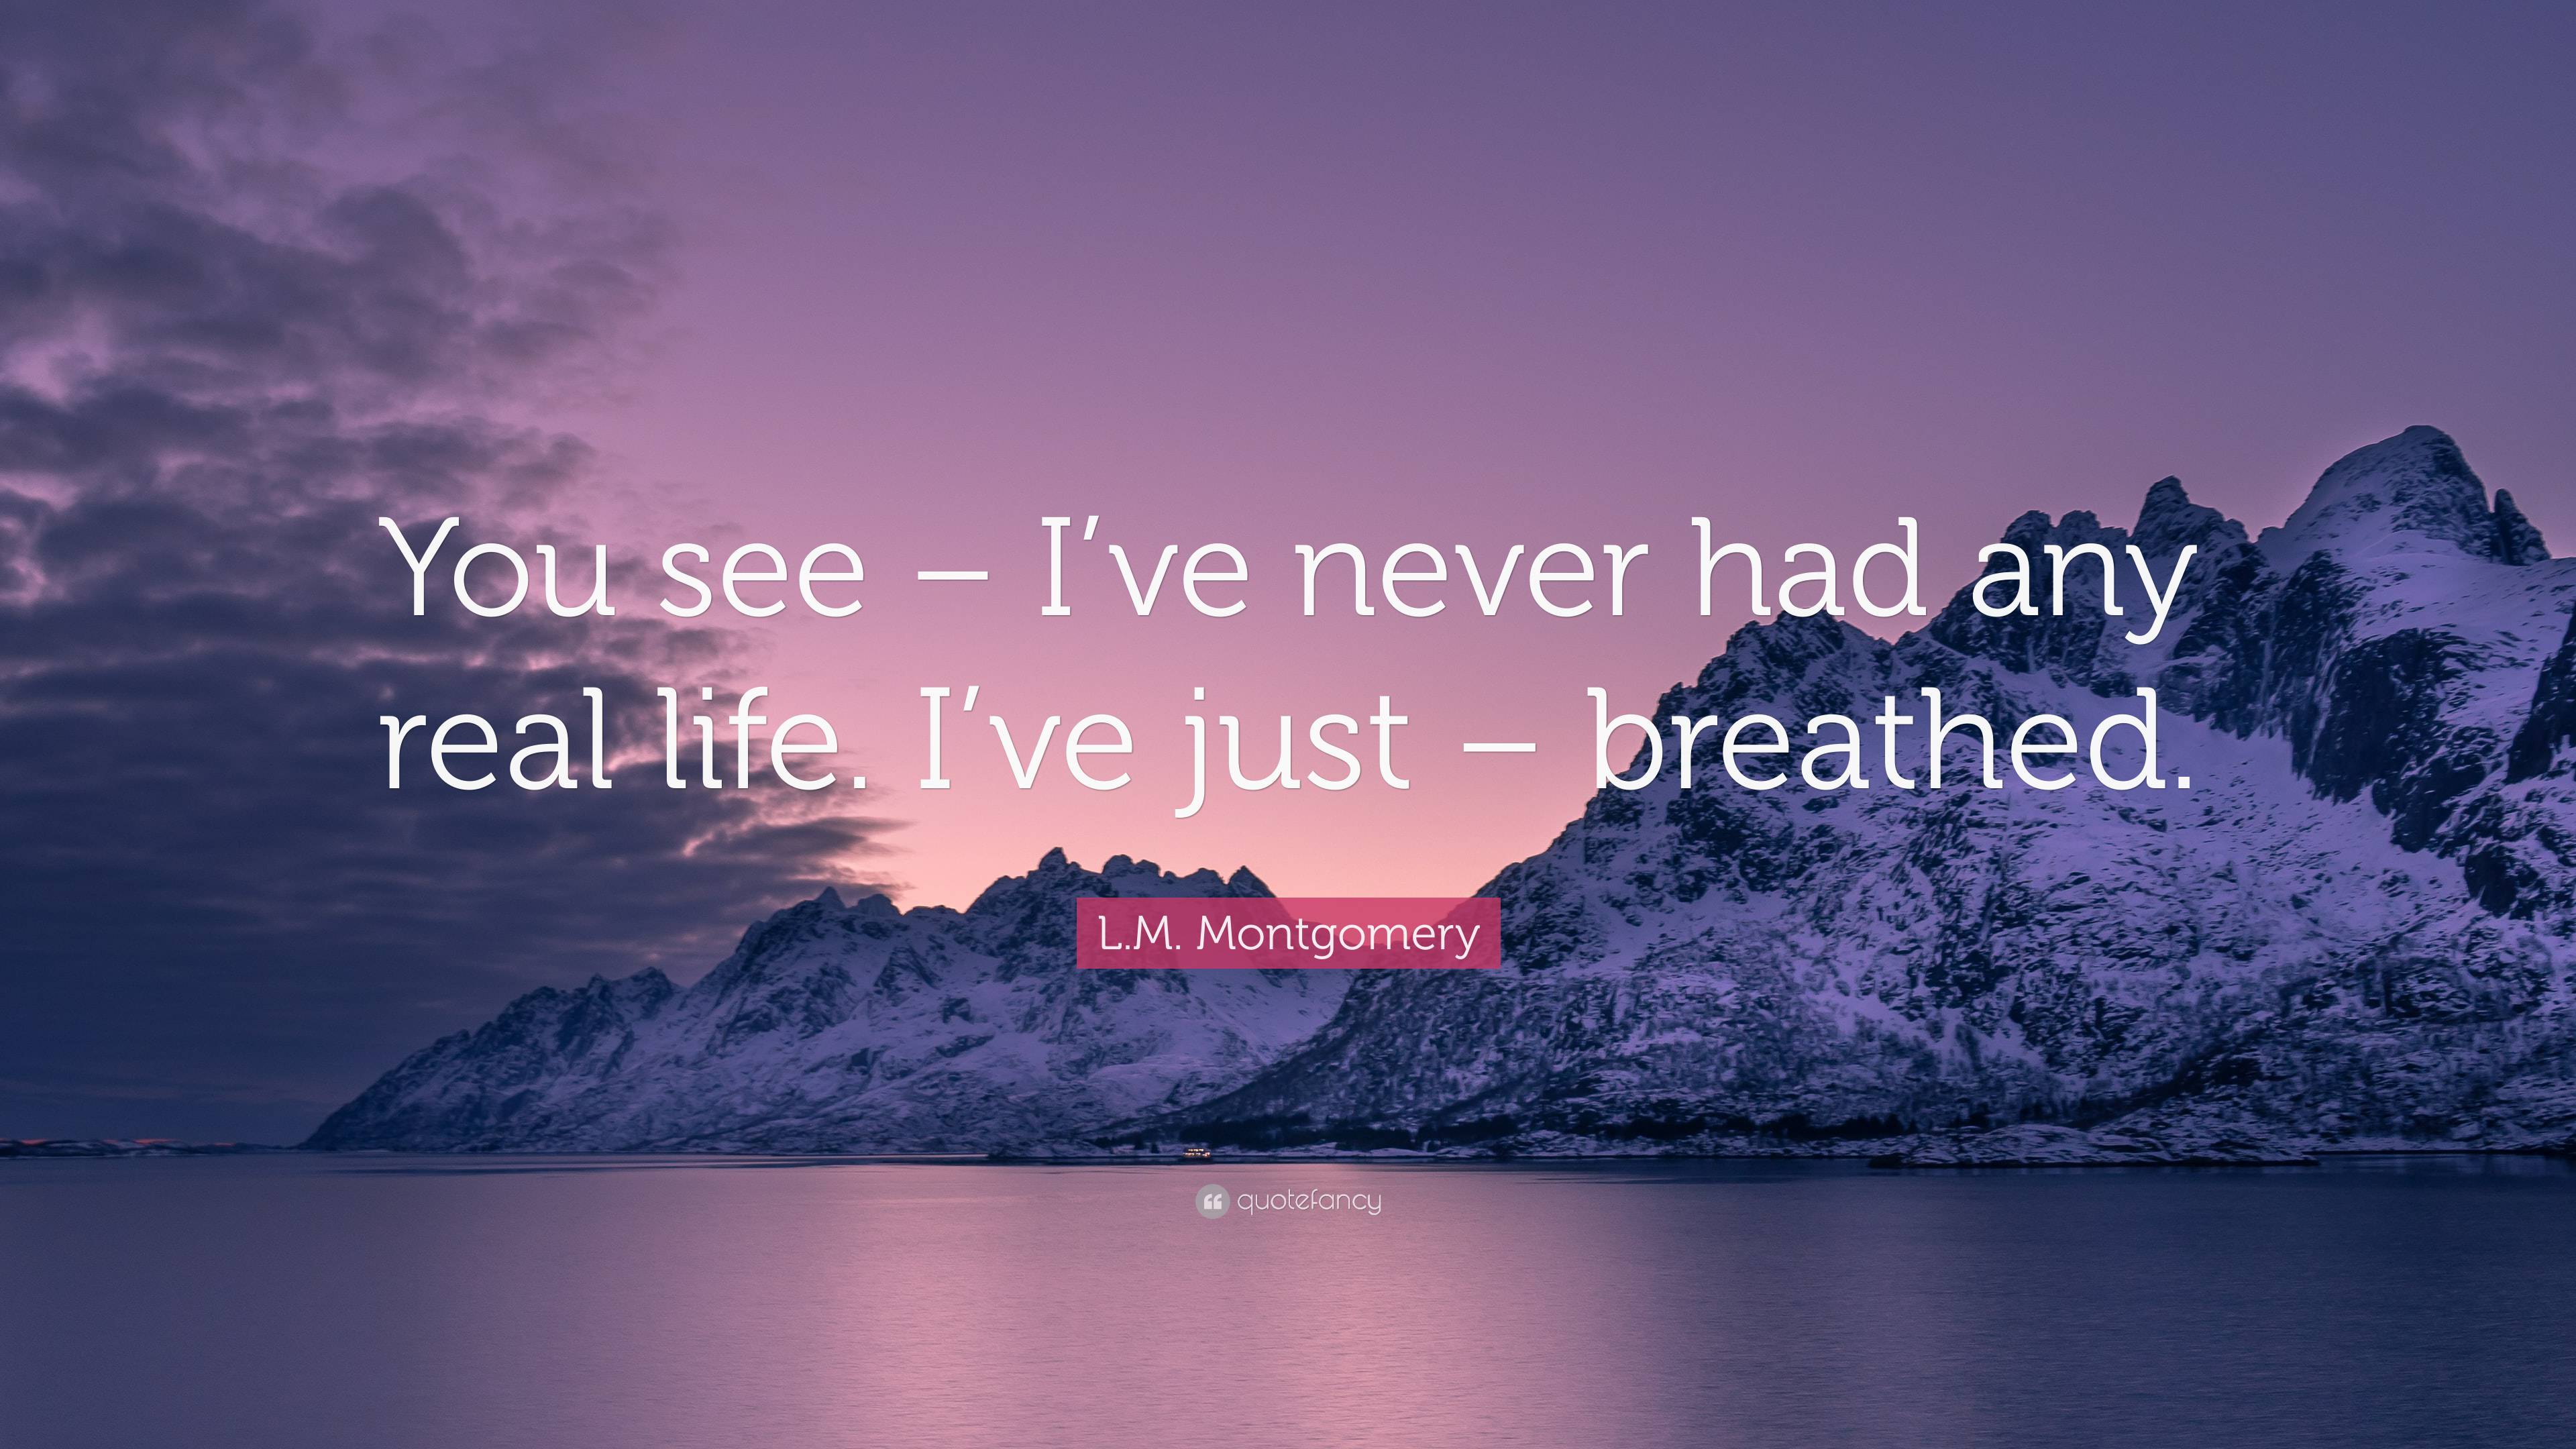 L.M. Montgomery Quote: “You see – I’ve never had any real life. I’ve ...